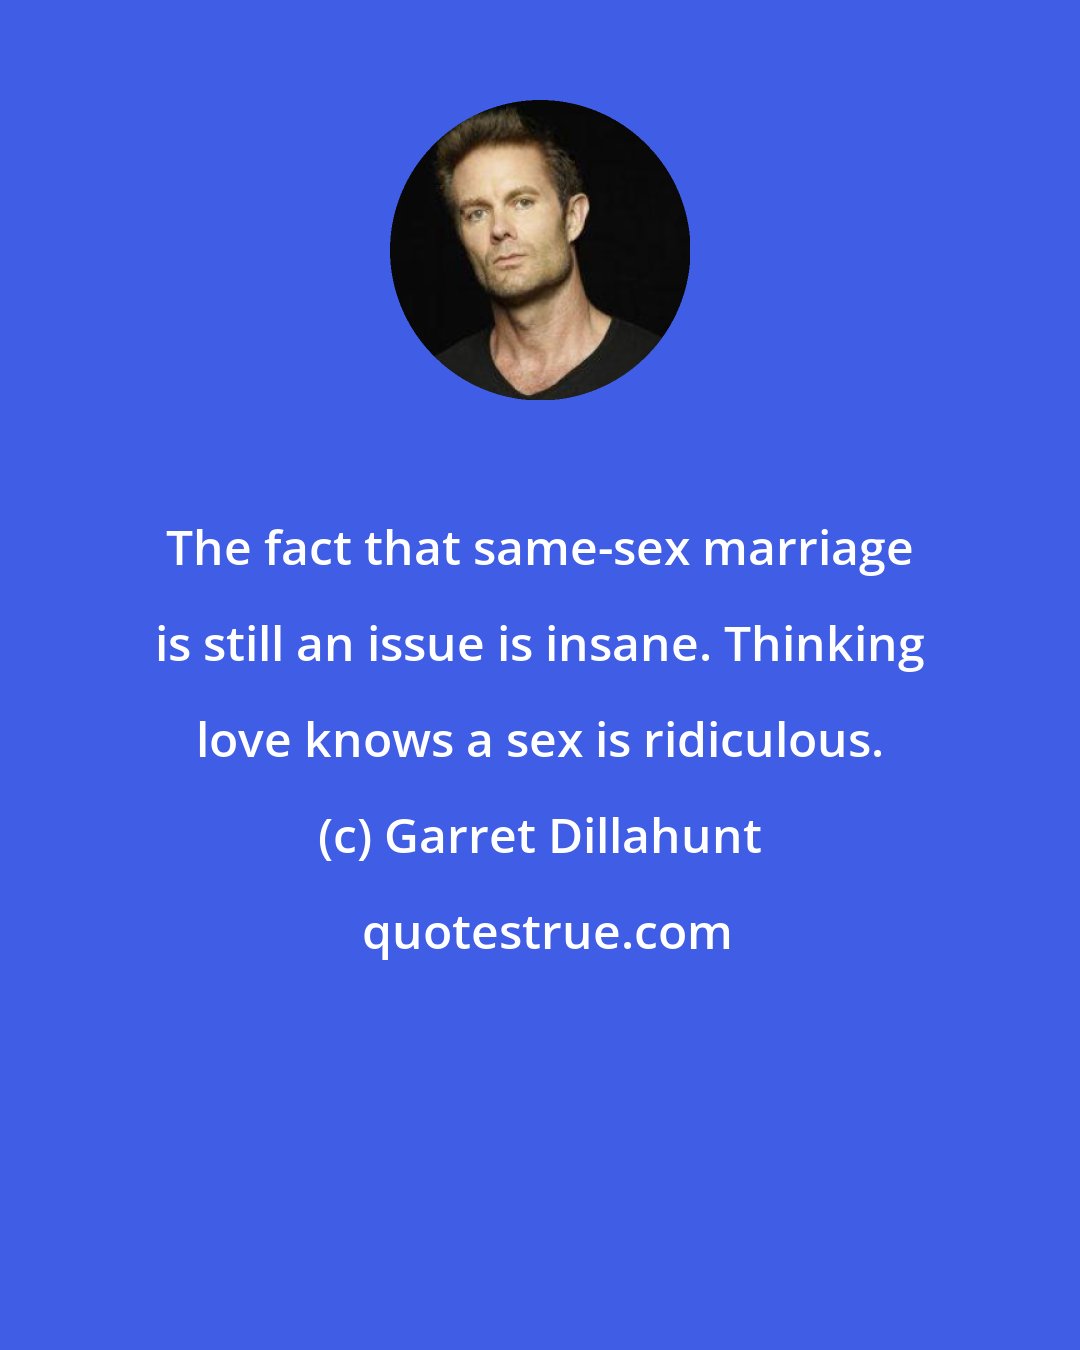 Garret Dillahunt: The fact that same-sex marriage is still an issue is insane. Thinking love knows a sex is ridiculous.